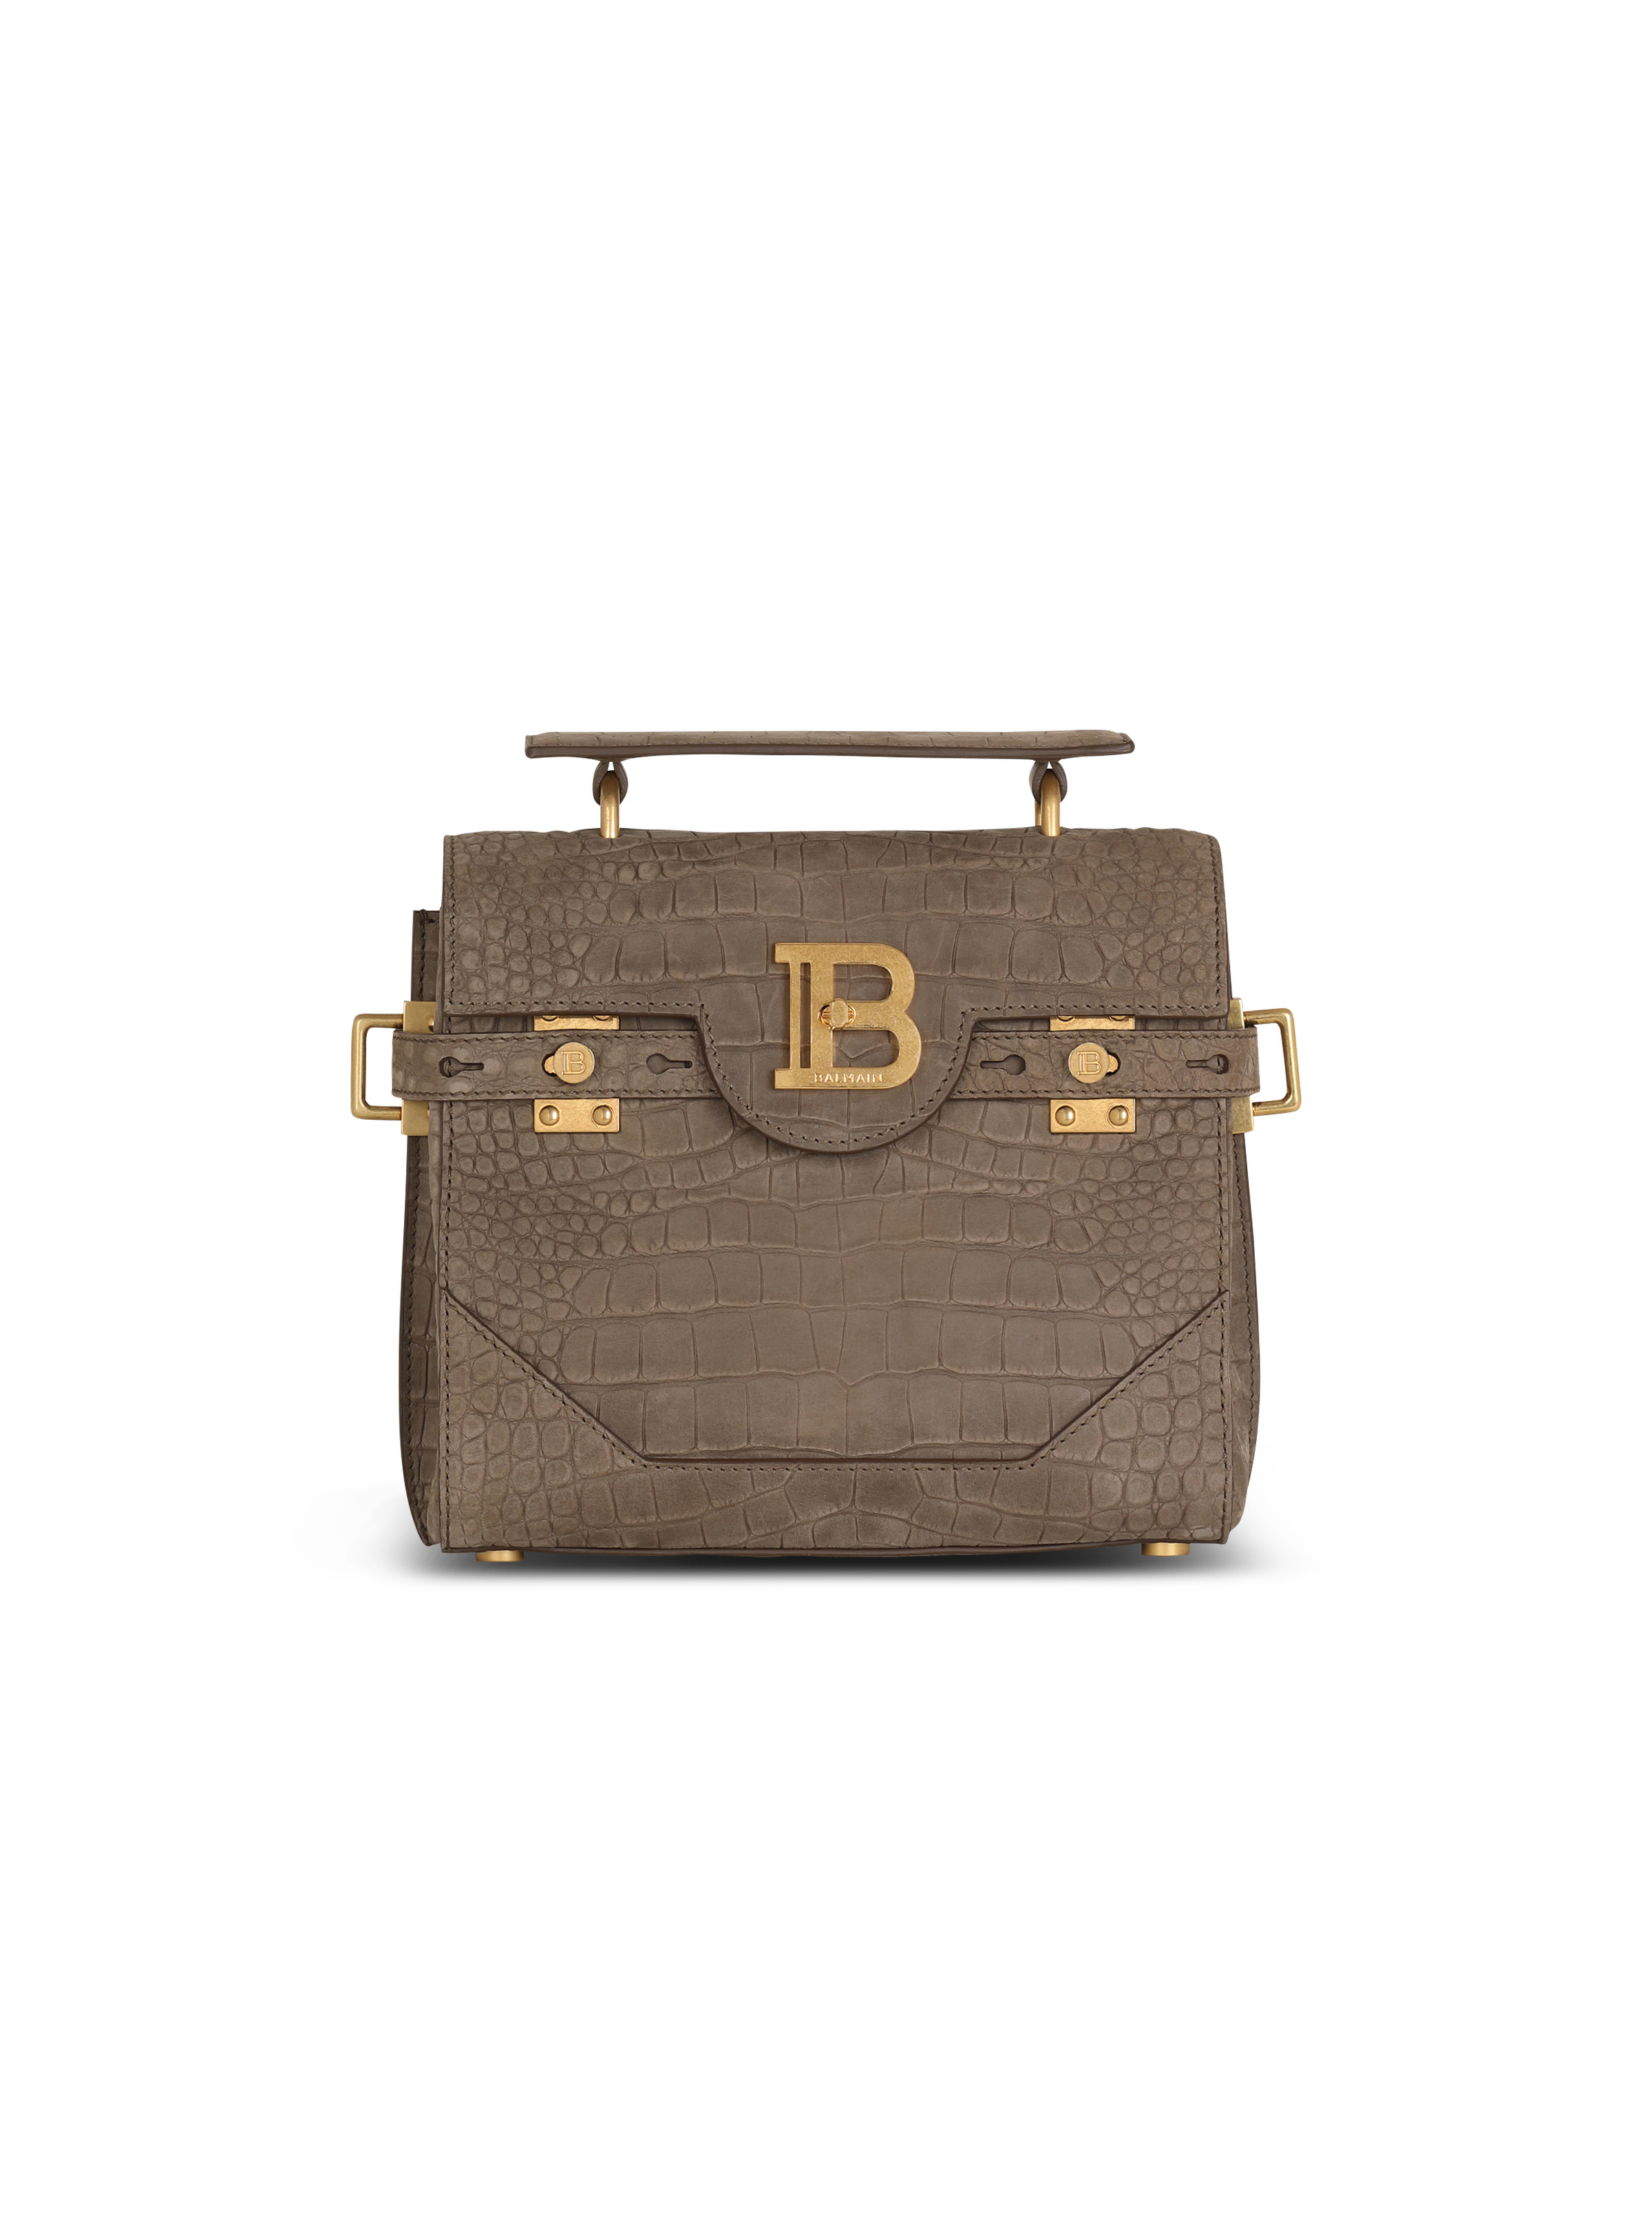 B-Buzz 23 bag in crocodile-embossed leather - 1